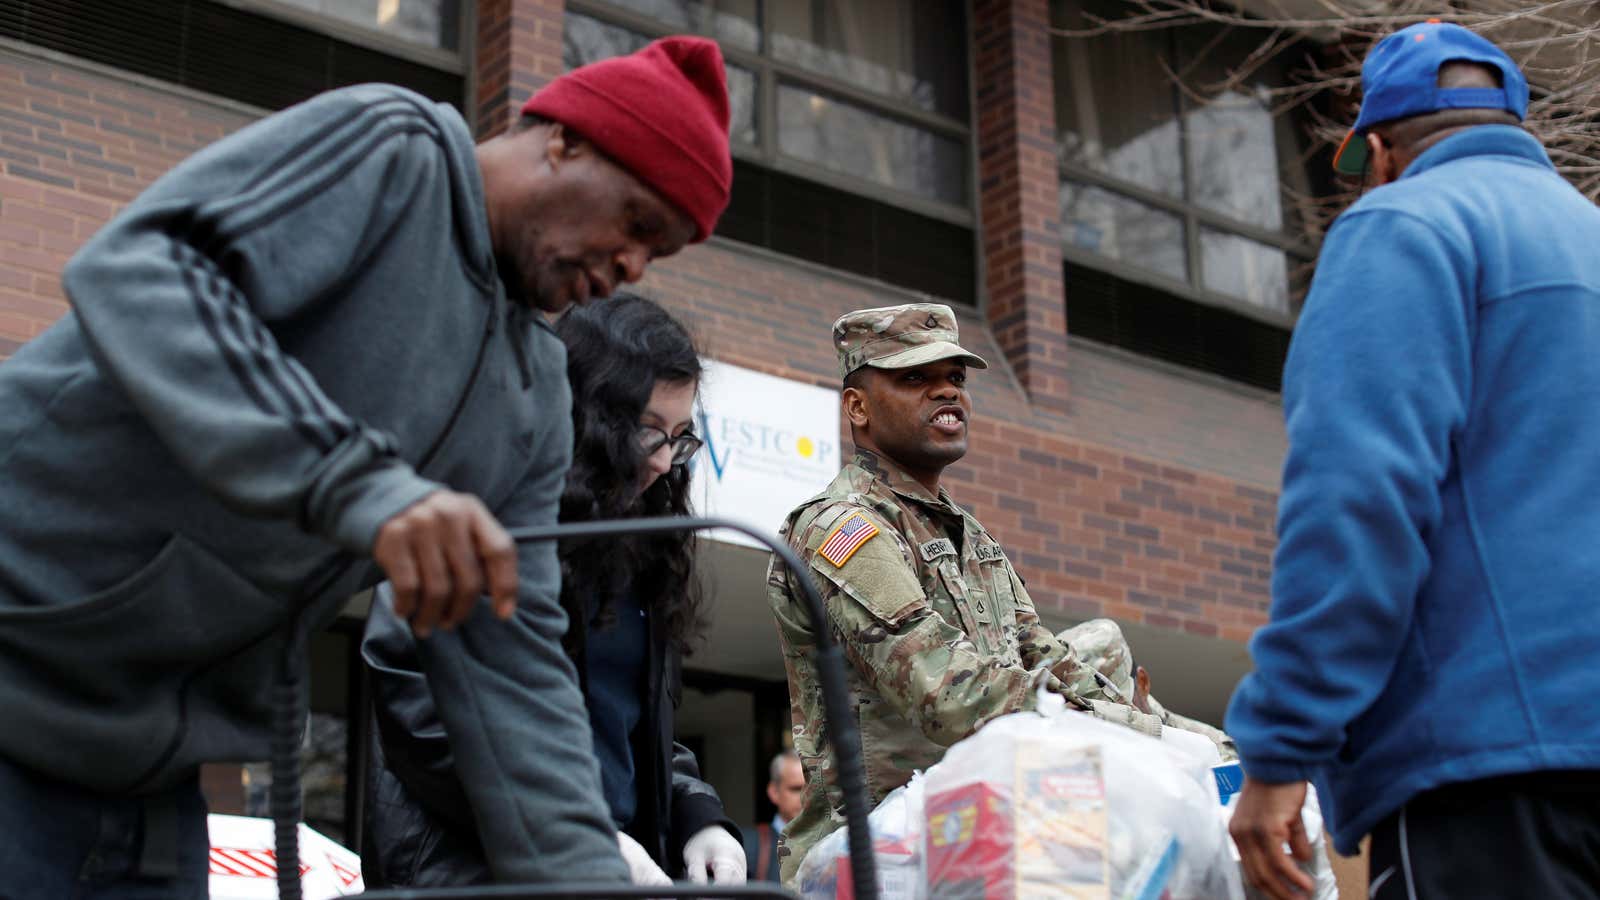 National Guard troops helping with food distribution in New Rochelle, New York.